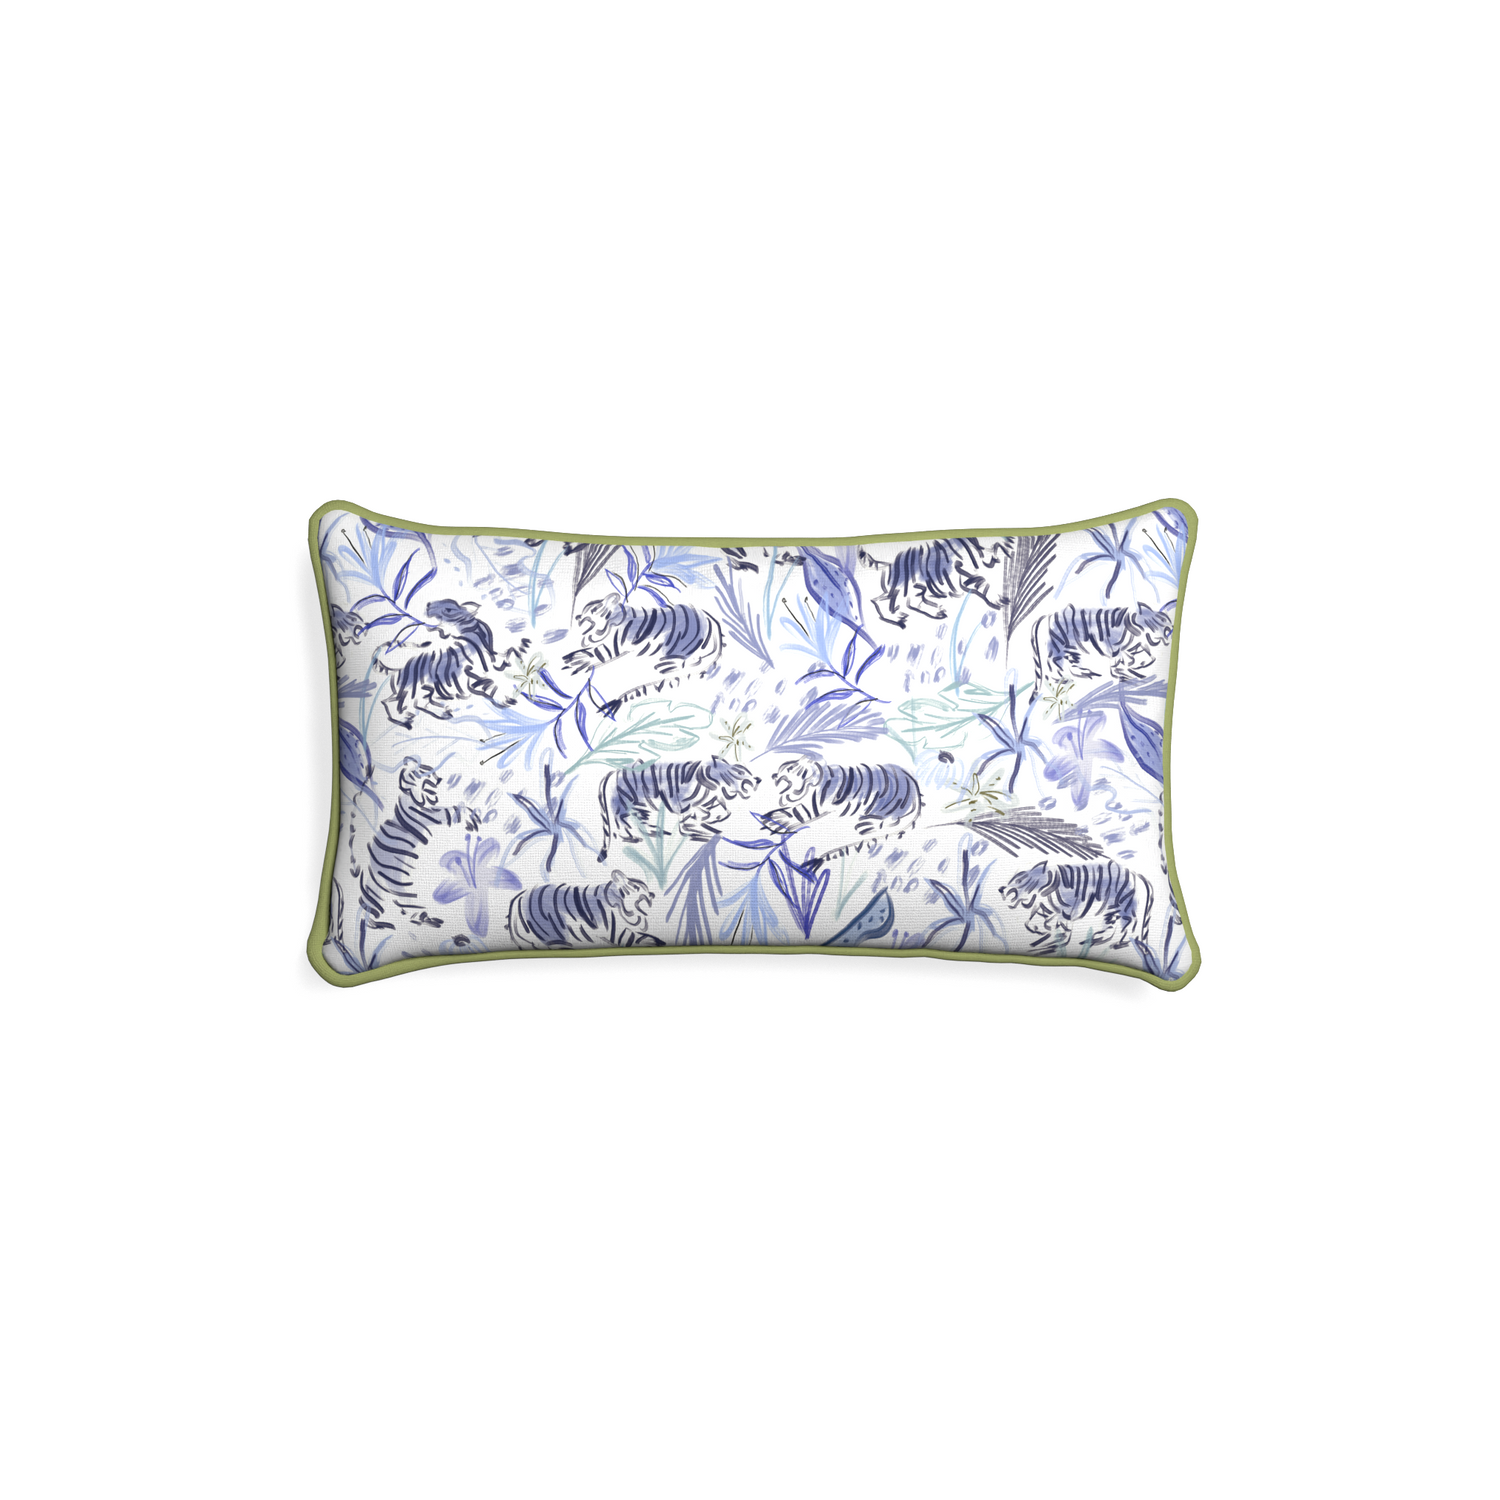 Petite-lumbar frida blue custom blue with intricate tiger designpillow with moss piping on white background